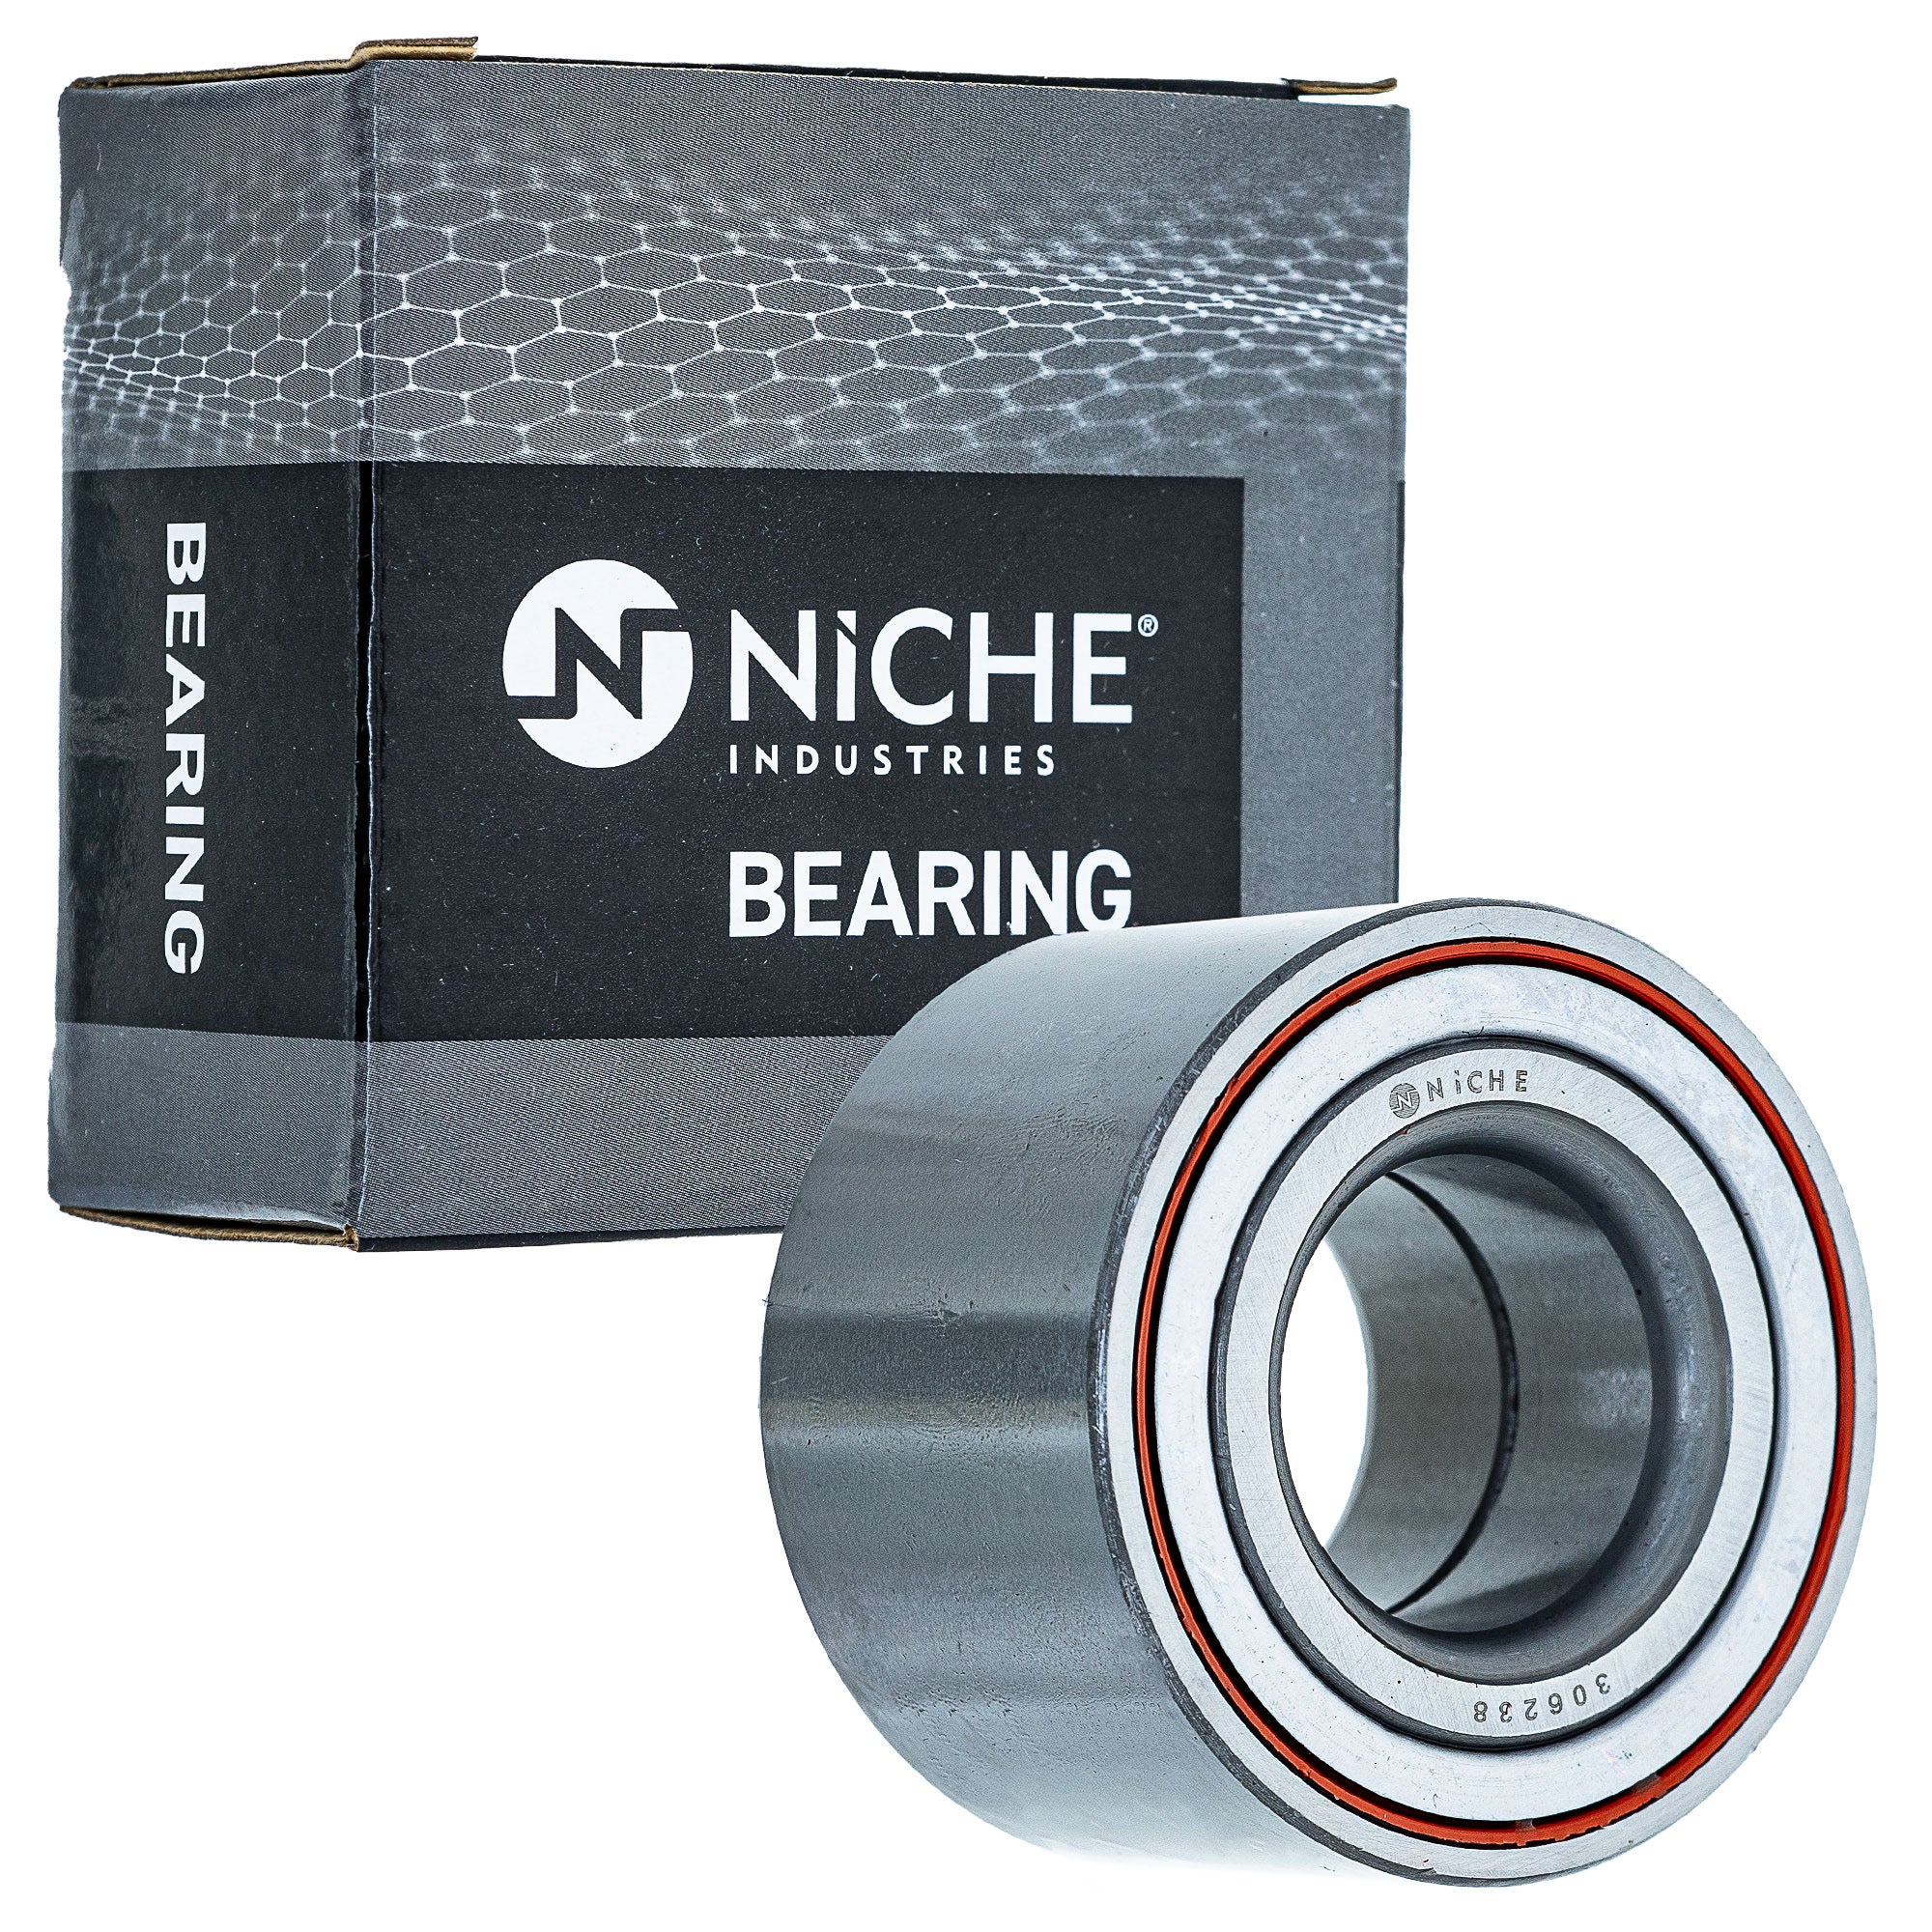 NICHE 519-CBB2203R Bearing 2-Pack for zOTHER Traxter Spyder